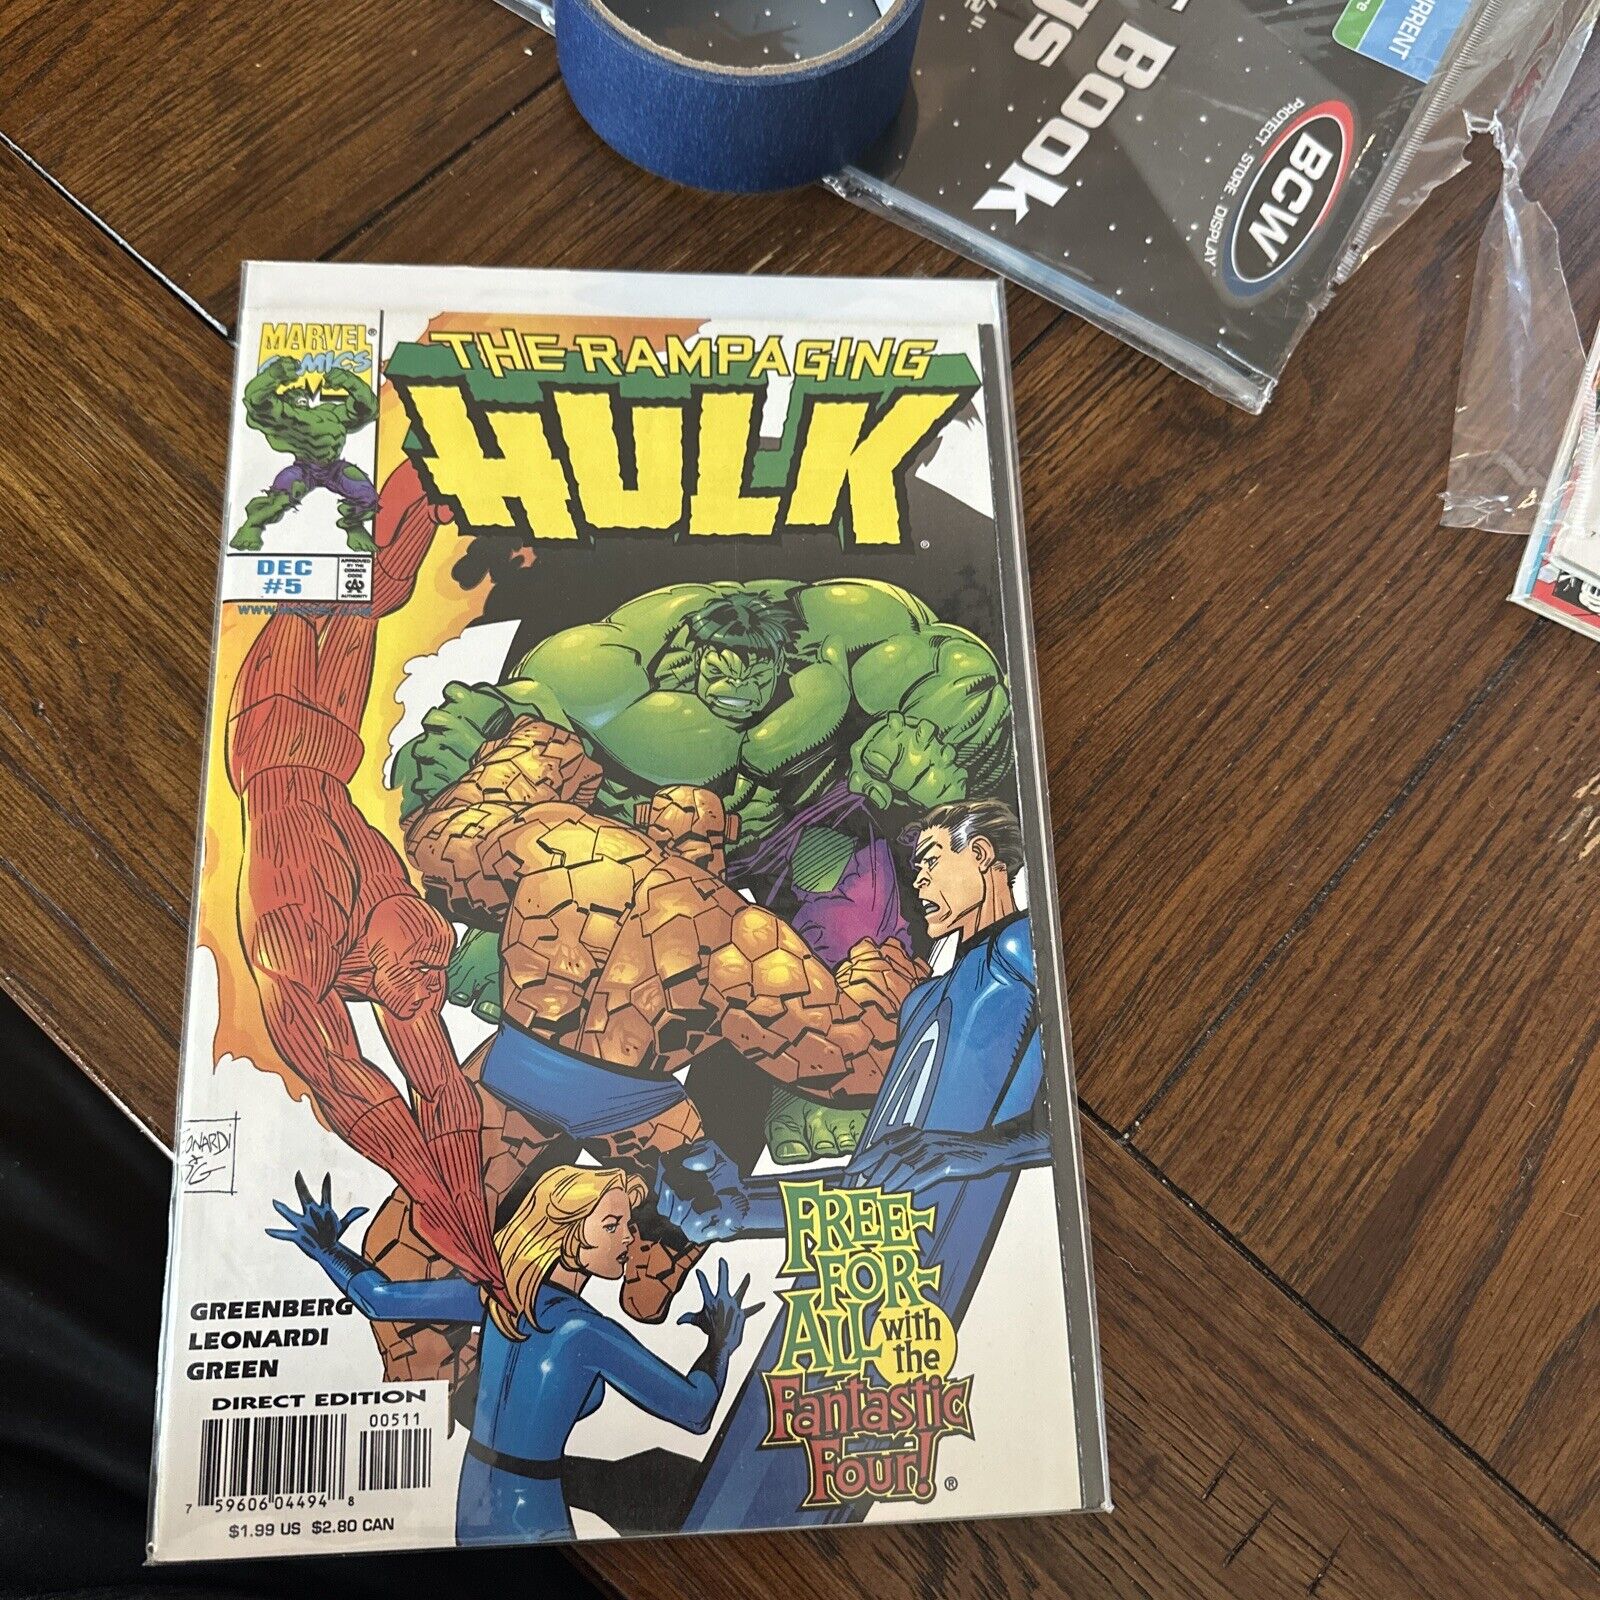 The Rampaging HULK #5 (1999 Marvel) Guest Starring Fantastic Four